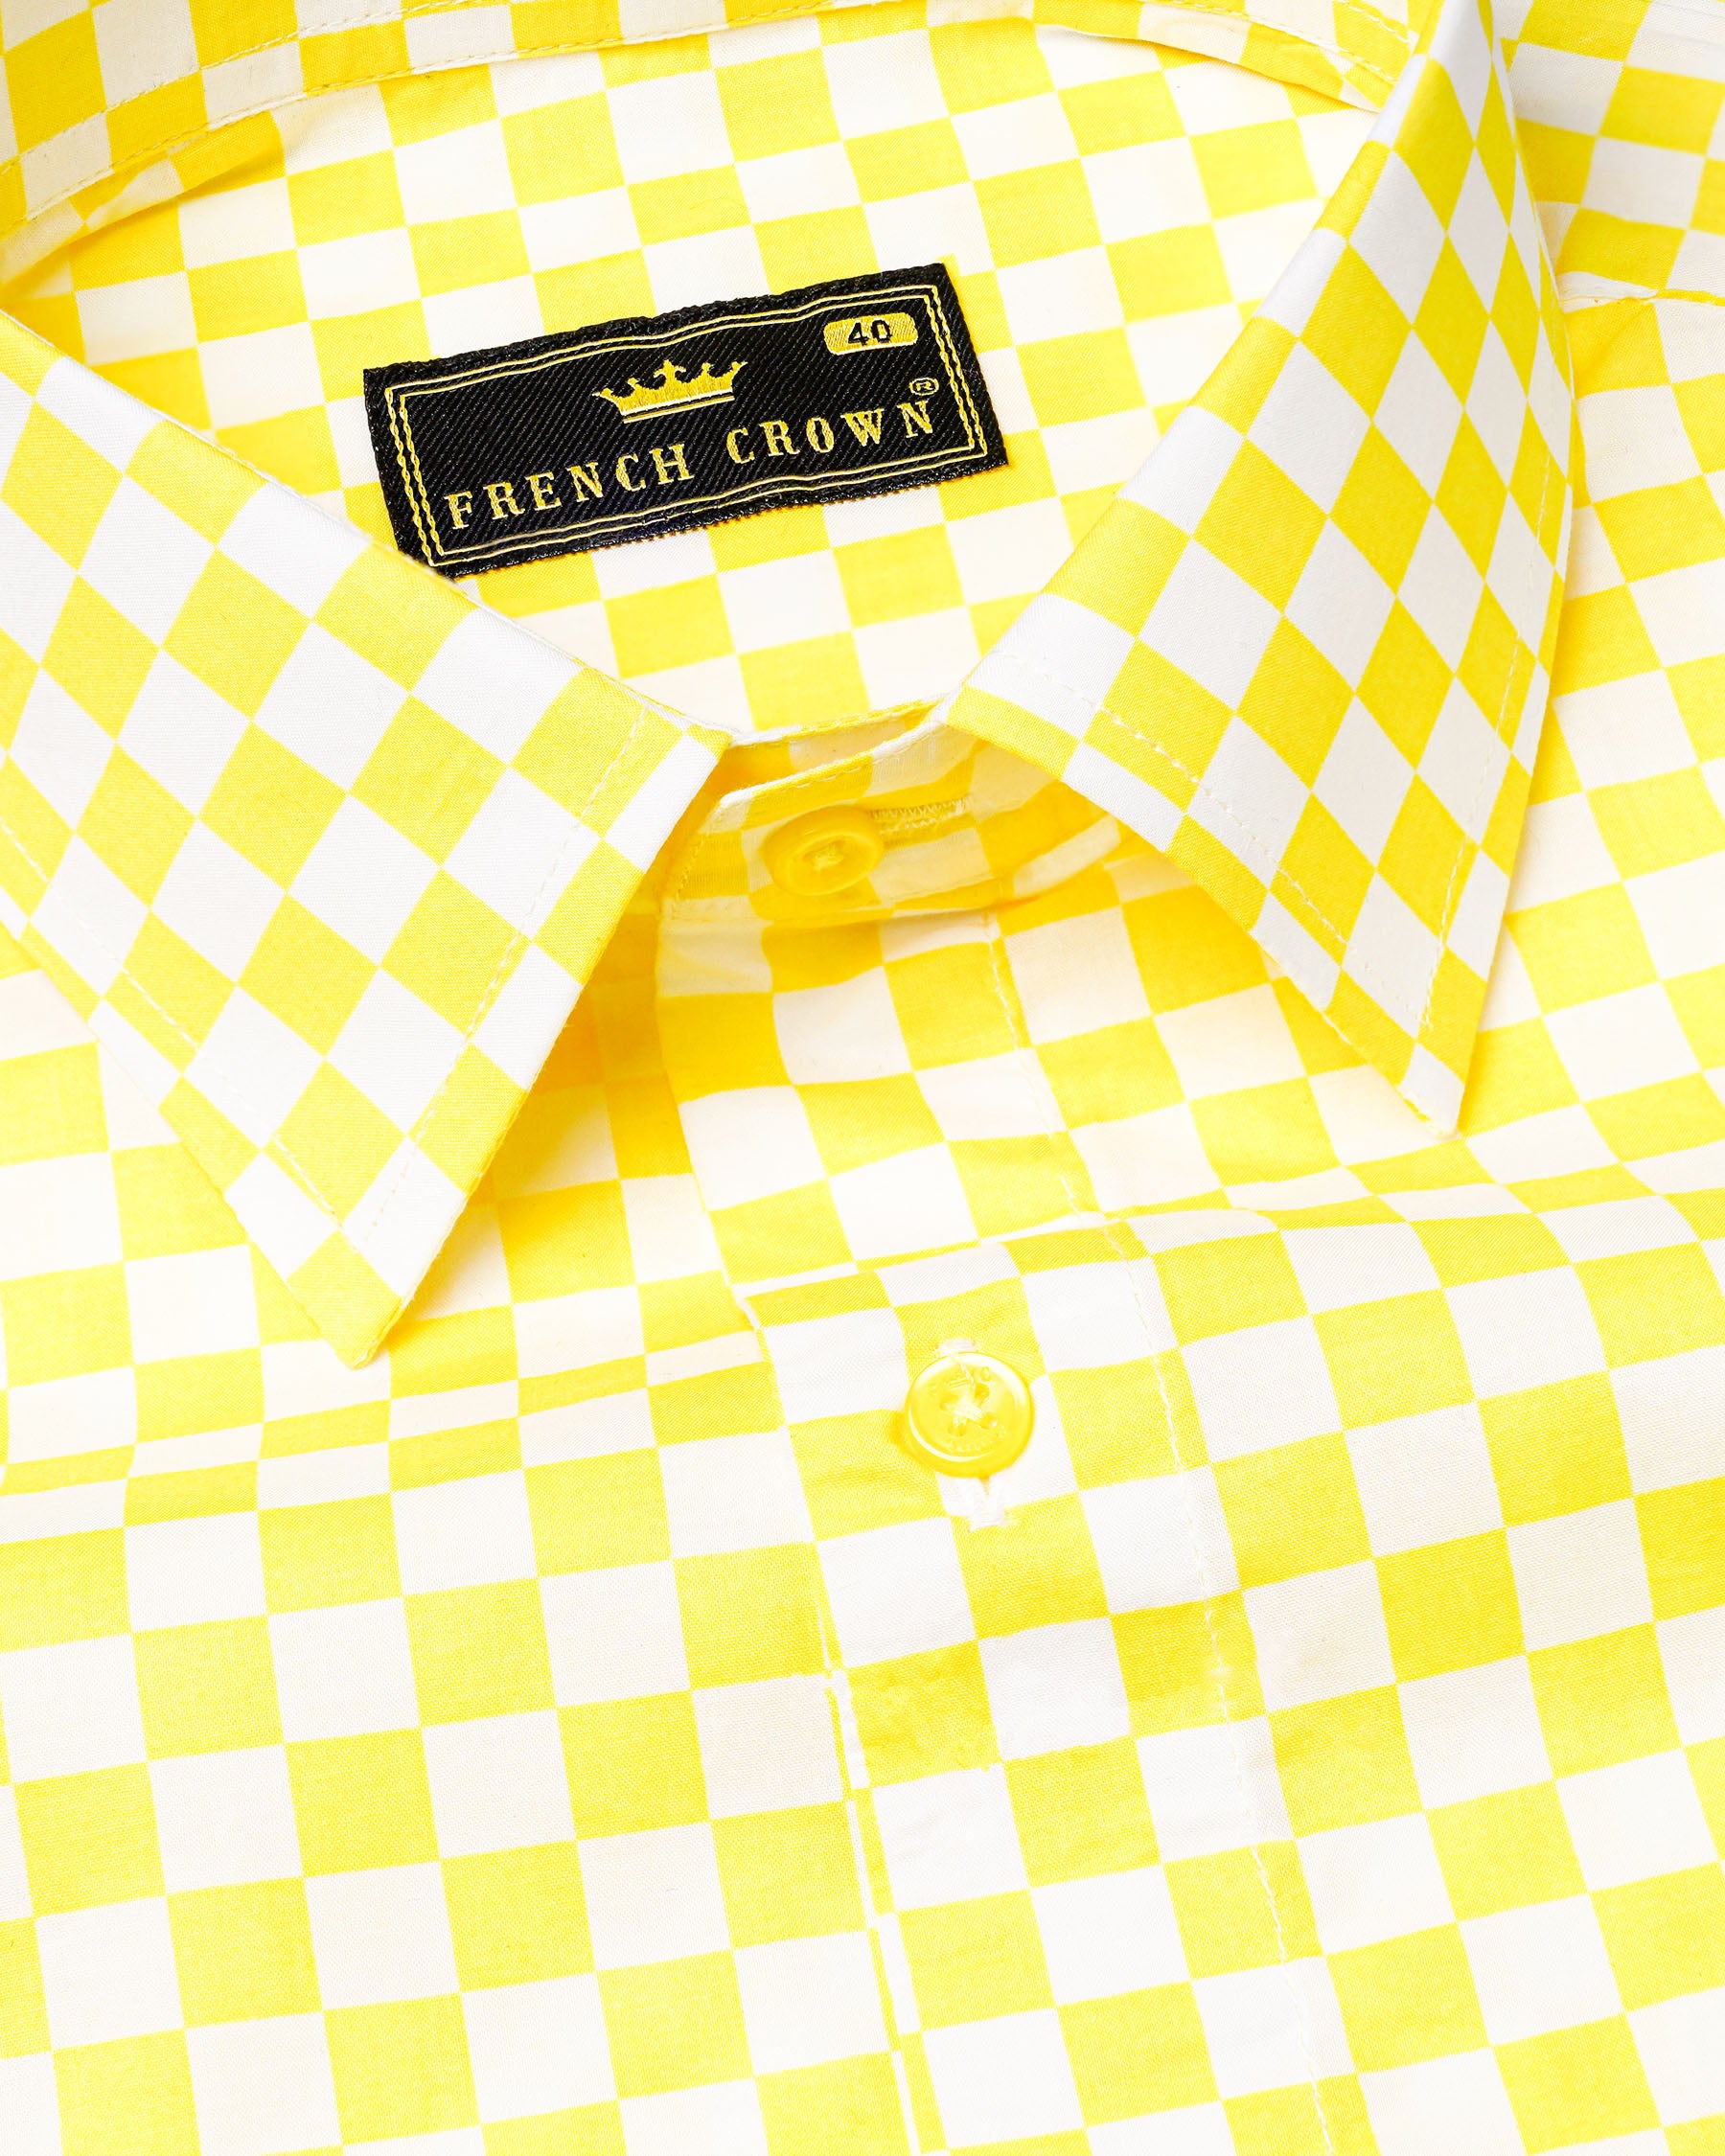 Witch Haze Yellow and White Checker Premium Cotton Shirt 7749-YL-38,7749-YL-38,7749-YL-39,7749-YL-39,7749-YL-40,7749-YL-40,7749-YL-42,7749-YL-42,7749-YL-44,7749-YL-44,7749-YL-46,7749-YL-46,7749-YL-48,7749-YL-48,7749-YL-50,7749-YL-50,7749-YL-52,7749-YL-52